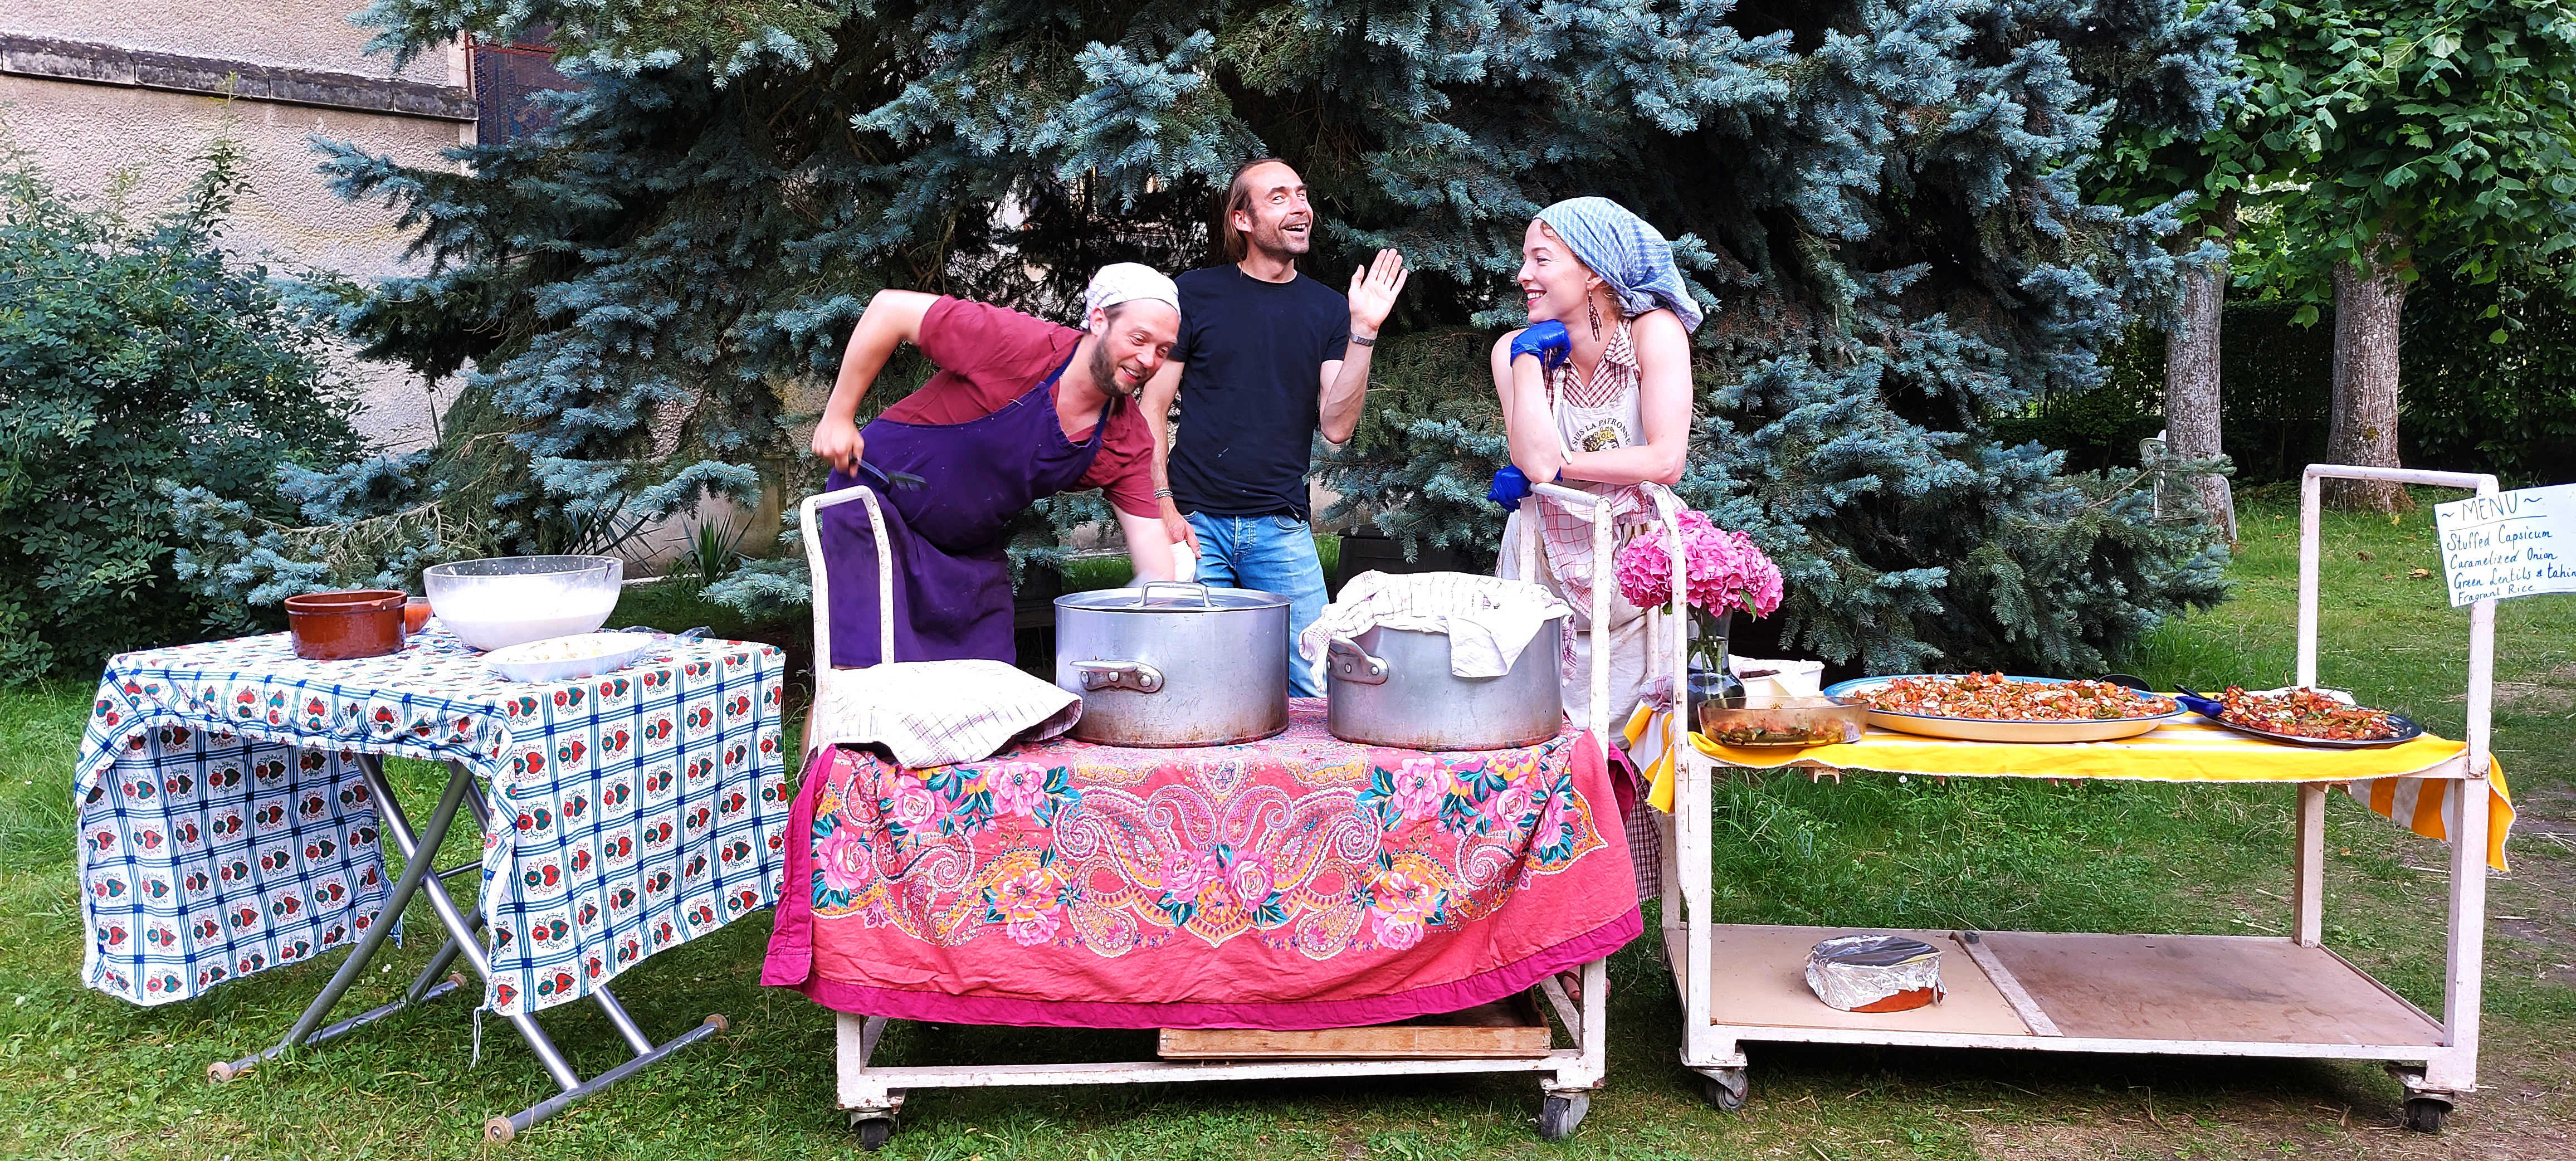 Our chefs for the week - Veniamin (Axe & Porridge), Daniel & Vera serving us exceptional dinner in the garden. PAF, July 2021. Photo credits: Nikos Doulos